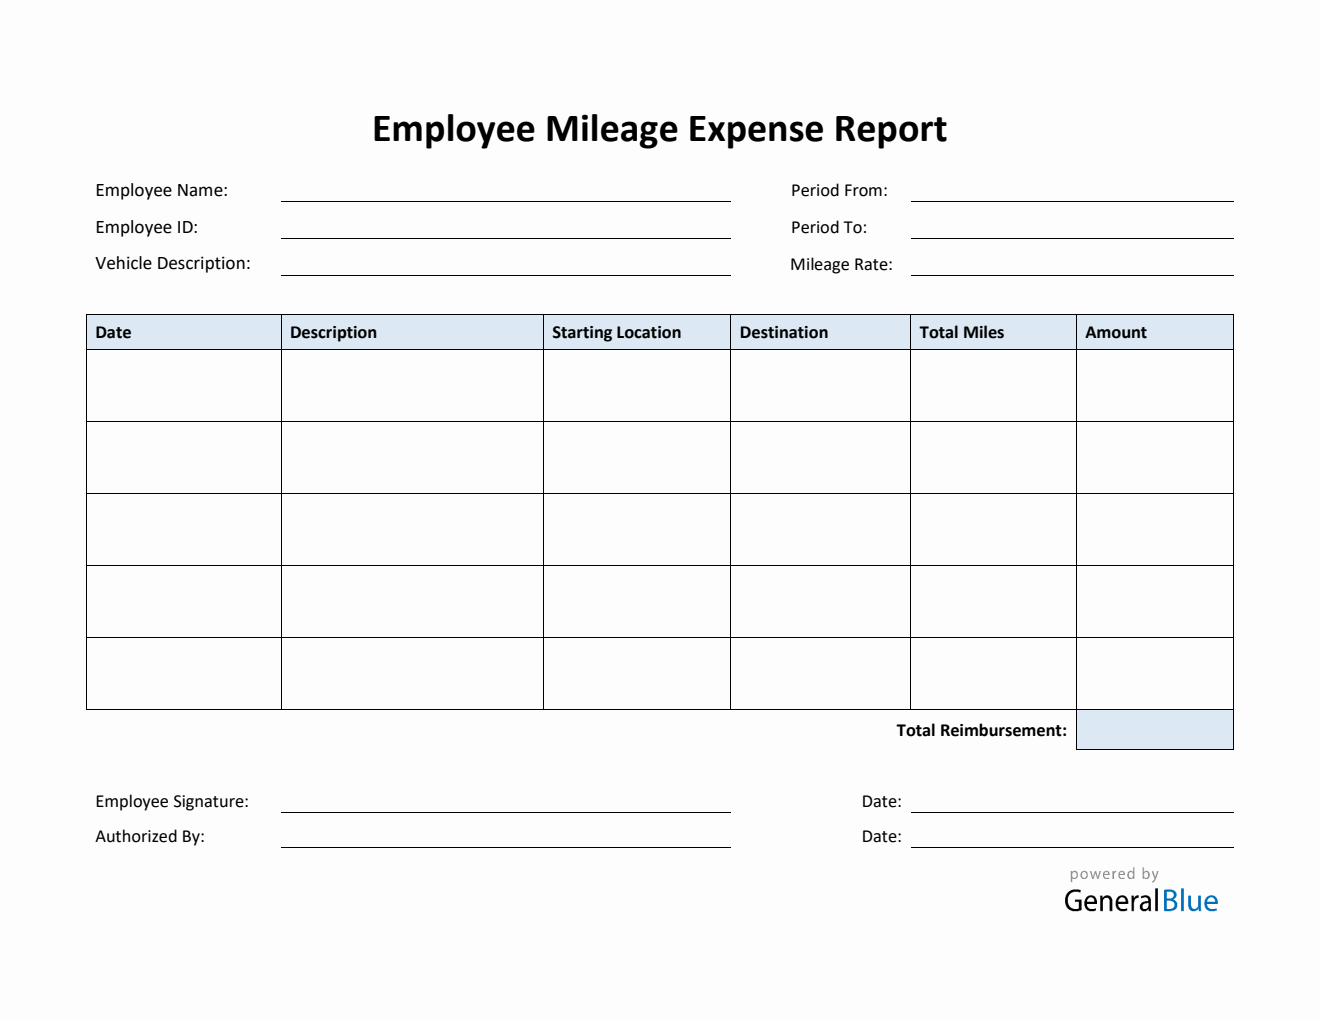 Editable Employee Mileage Expense Report Template in Word